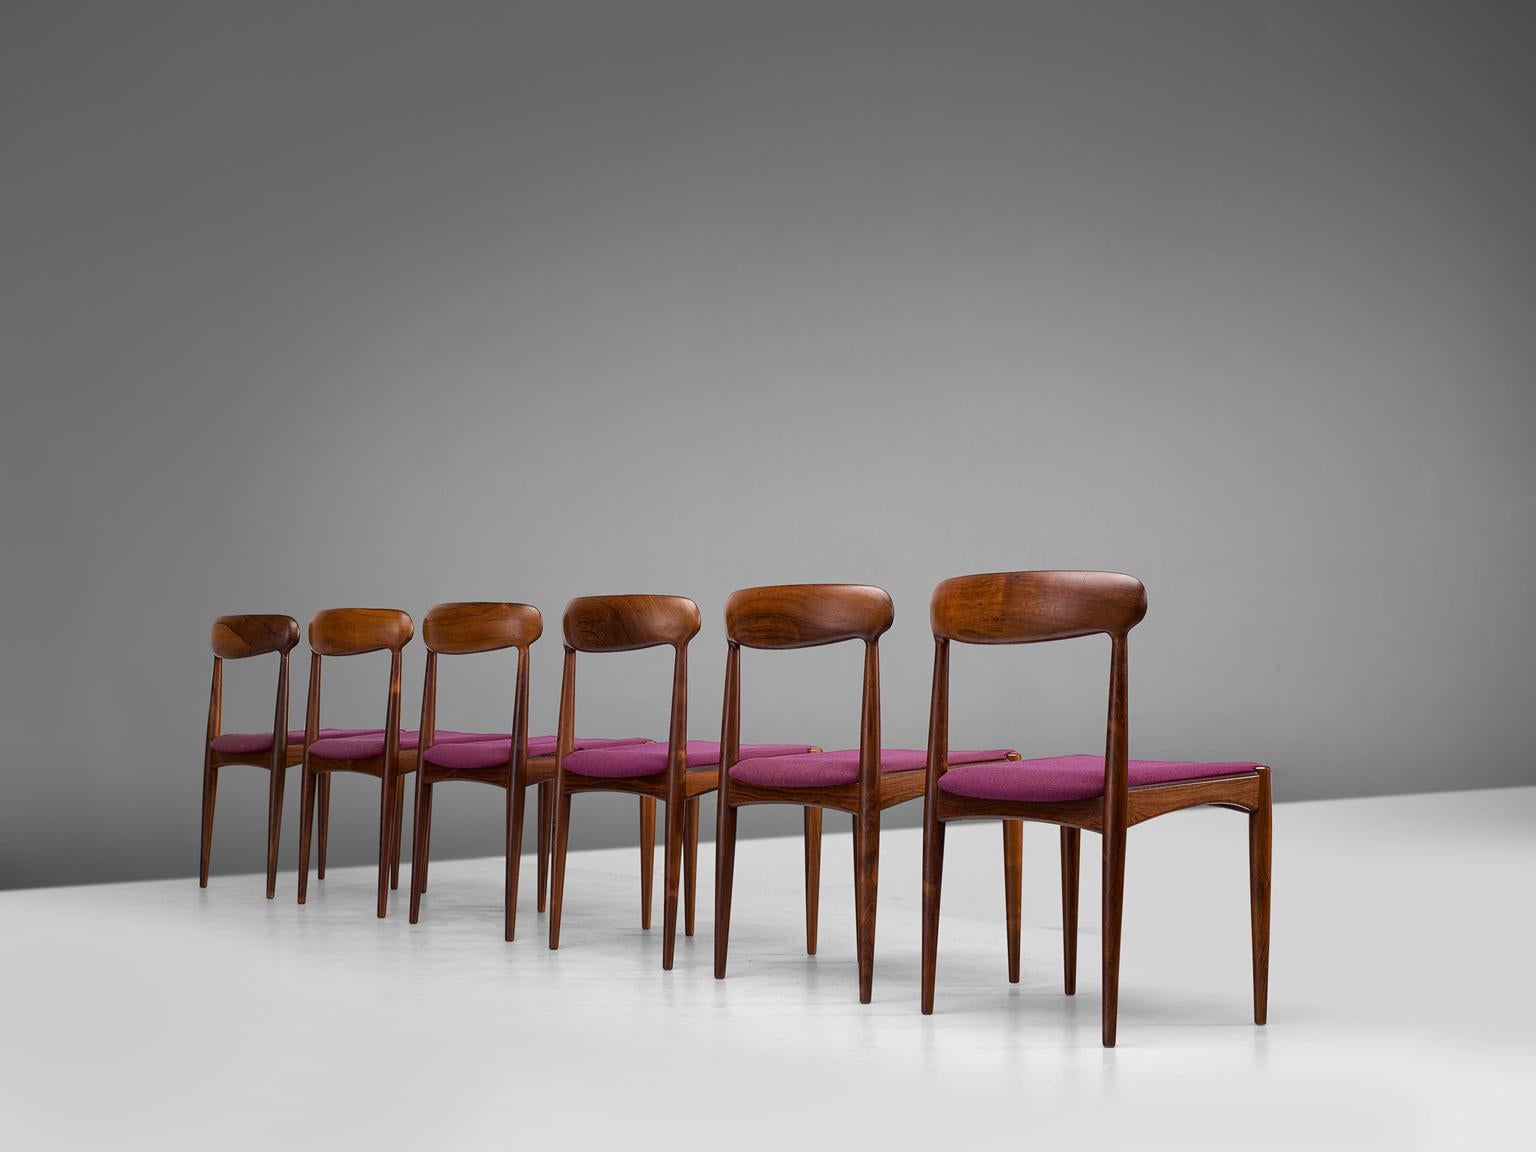 Dining room chairs, rosewood, purple fabric by Johannes Andersen and manufactured Uldum furniture factory, Denmark,1960s.

The restrained chic rosewood dining chairs are soft and warm in their appearance. The backrest is slightly tilted and